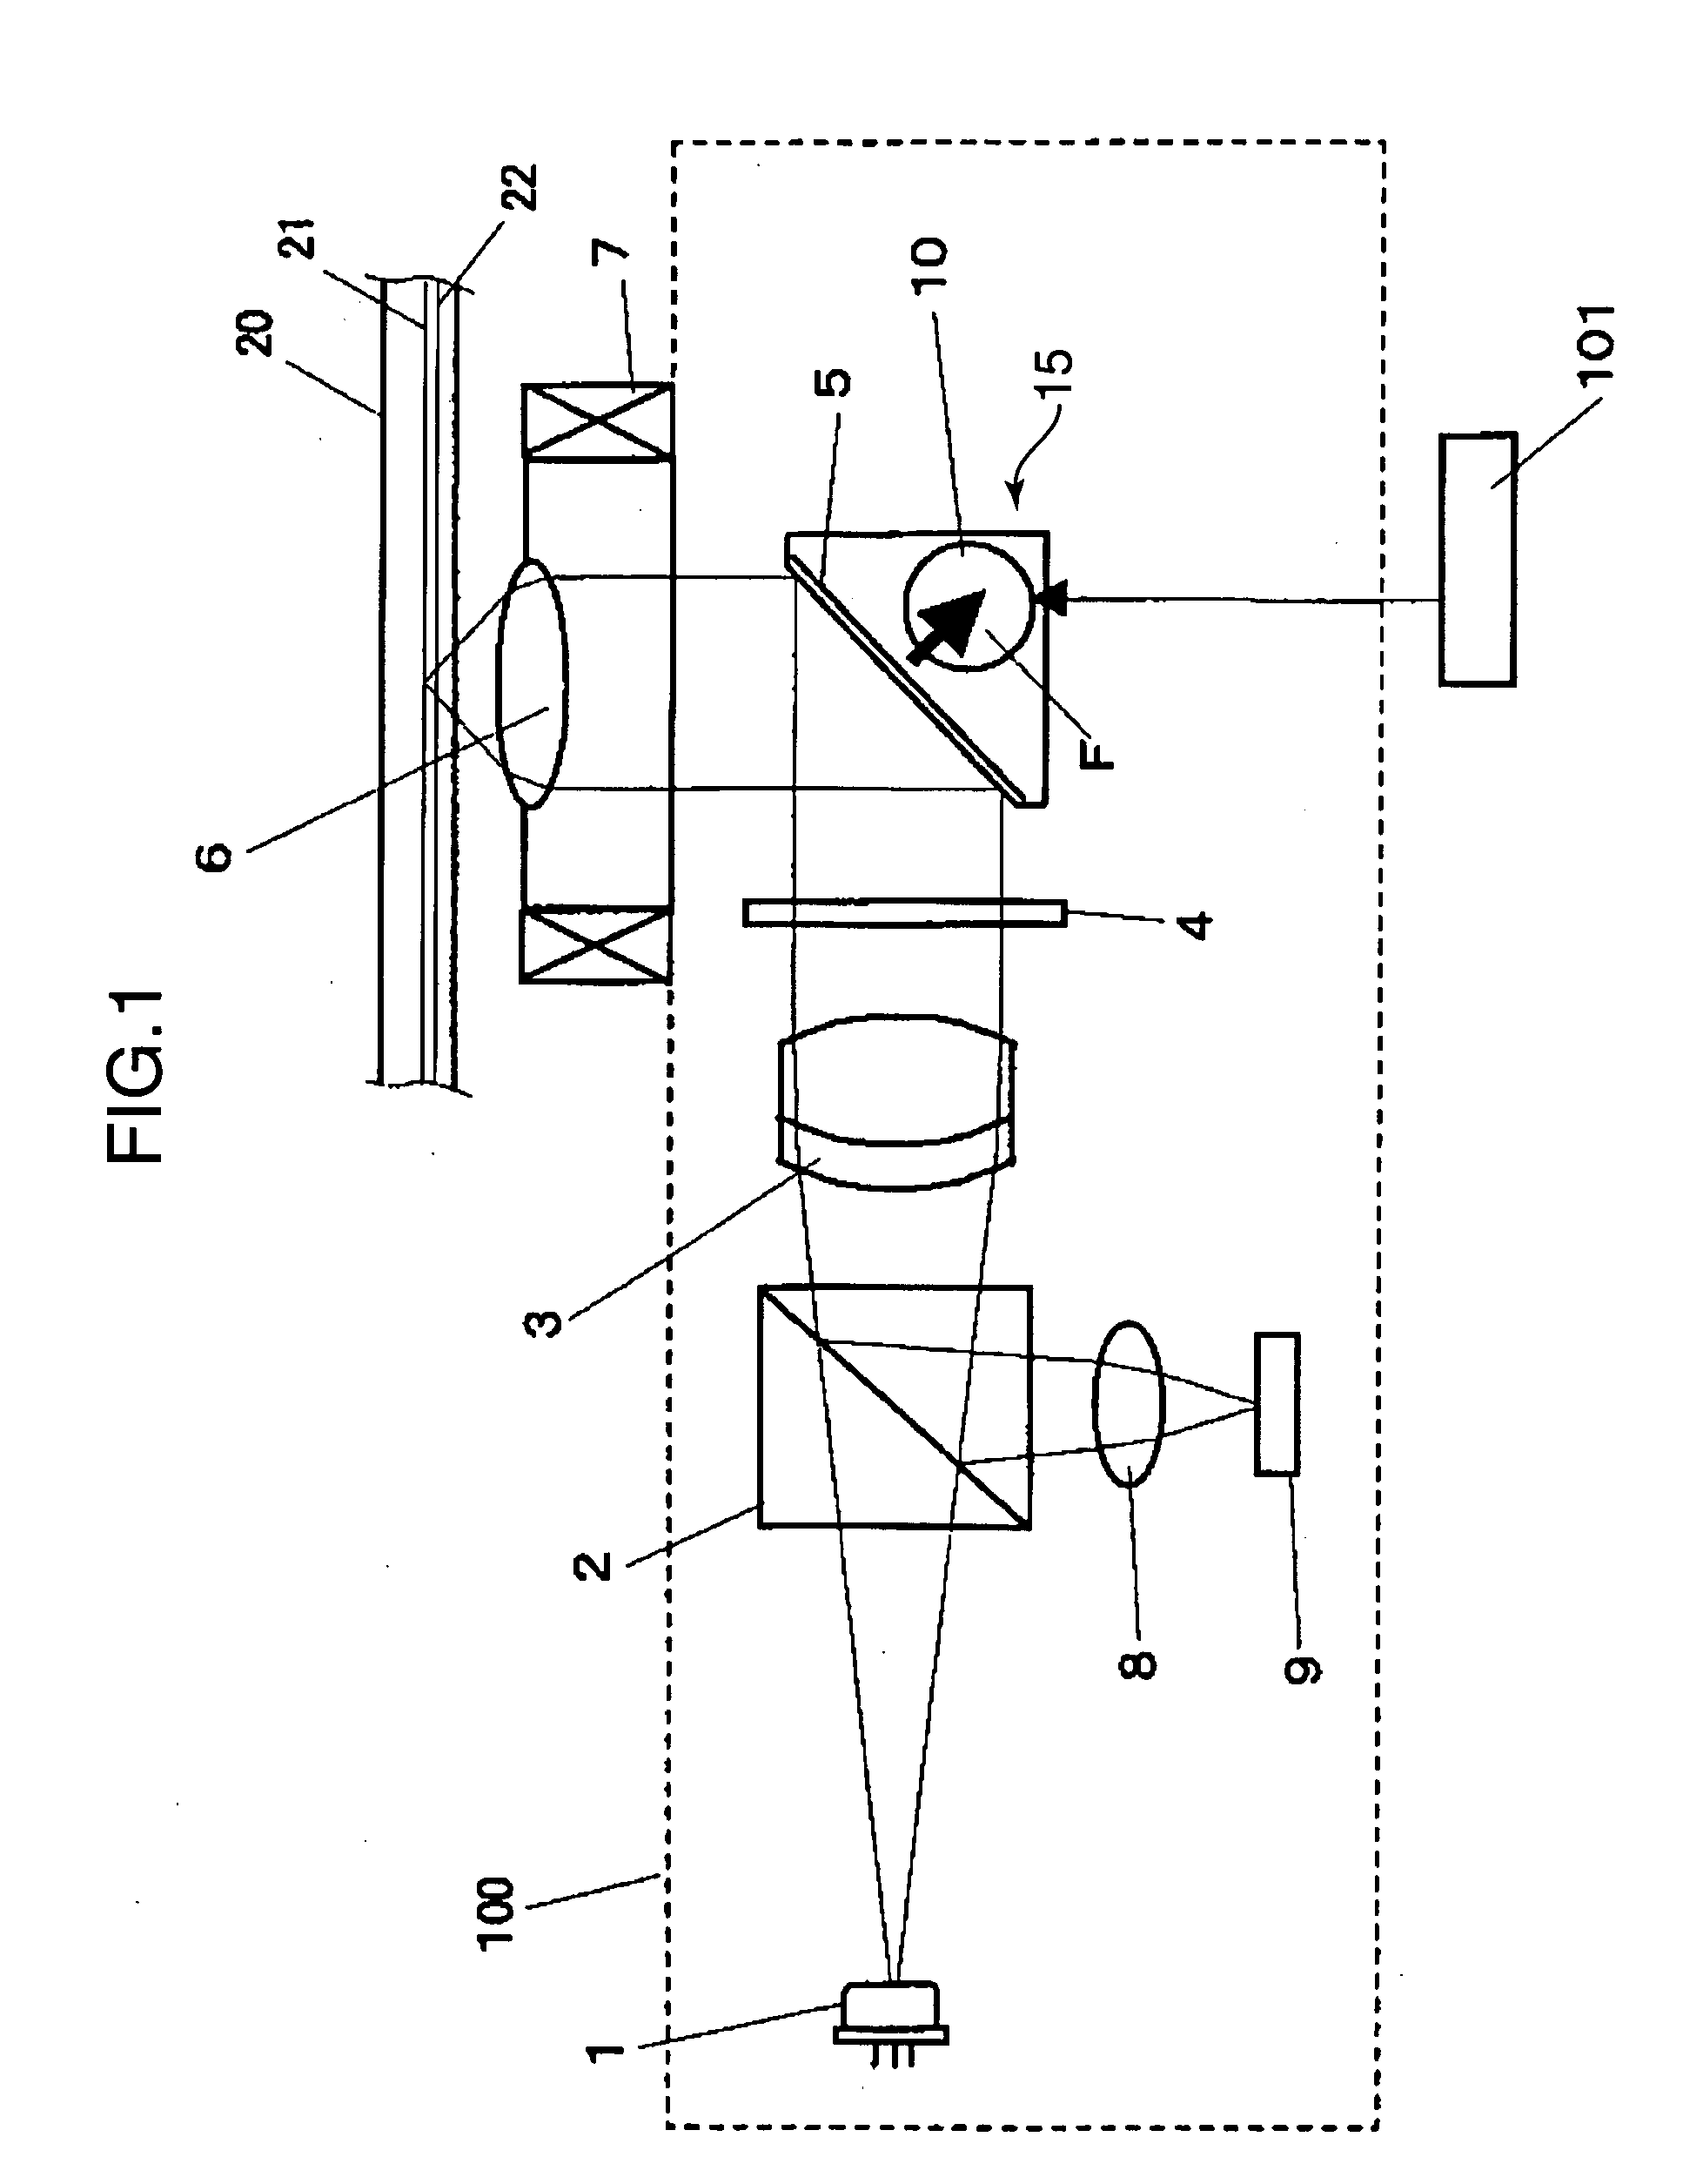 Deformable mirror, optical head, and optical recording and playback device